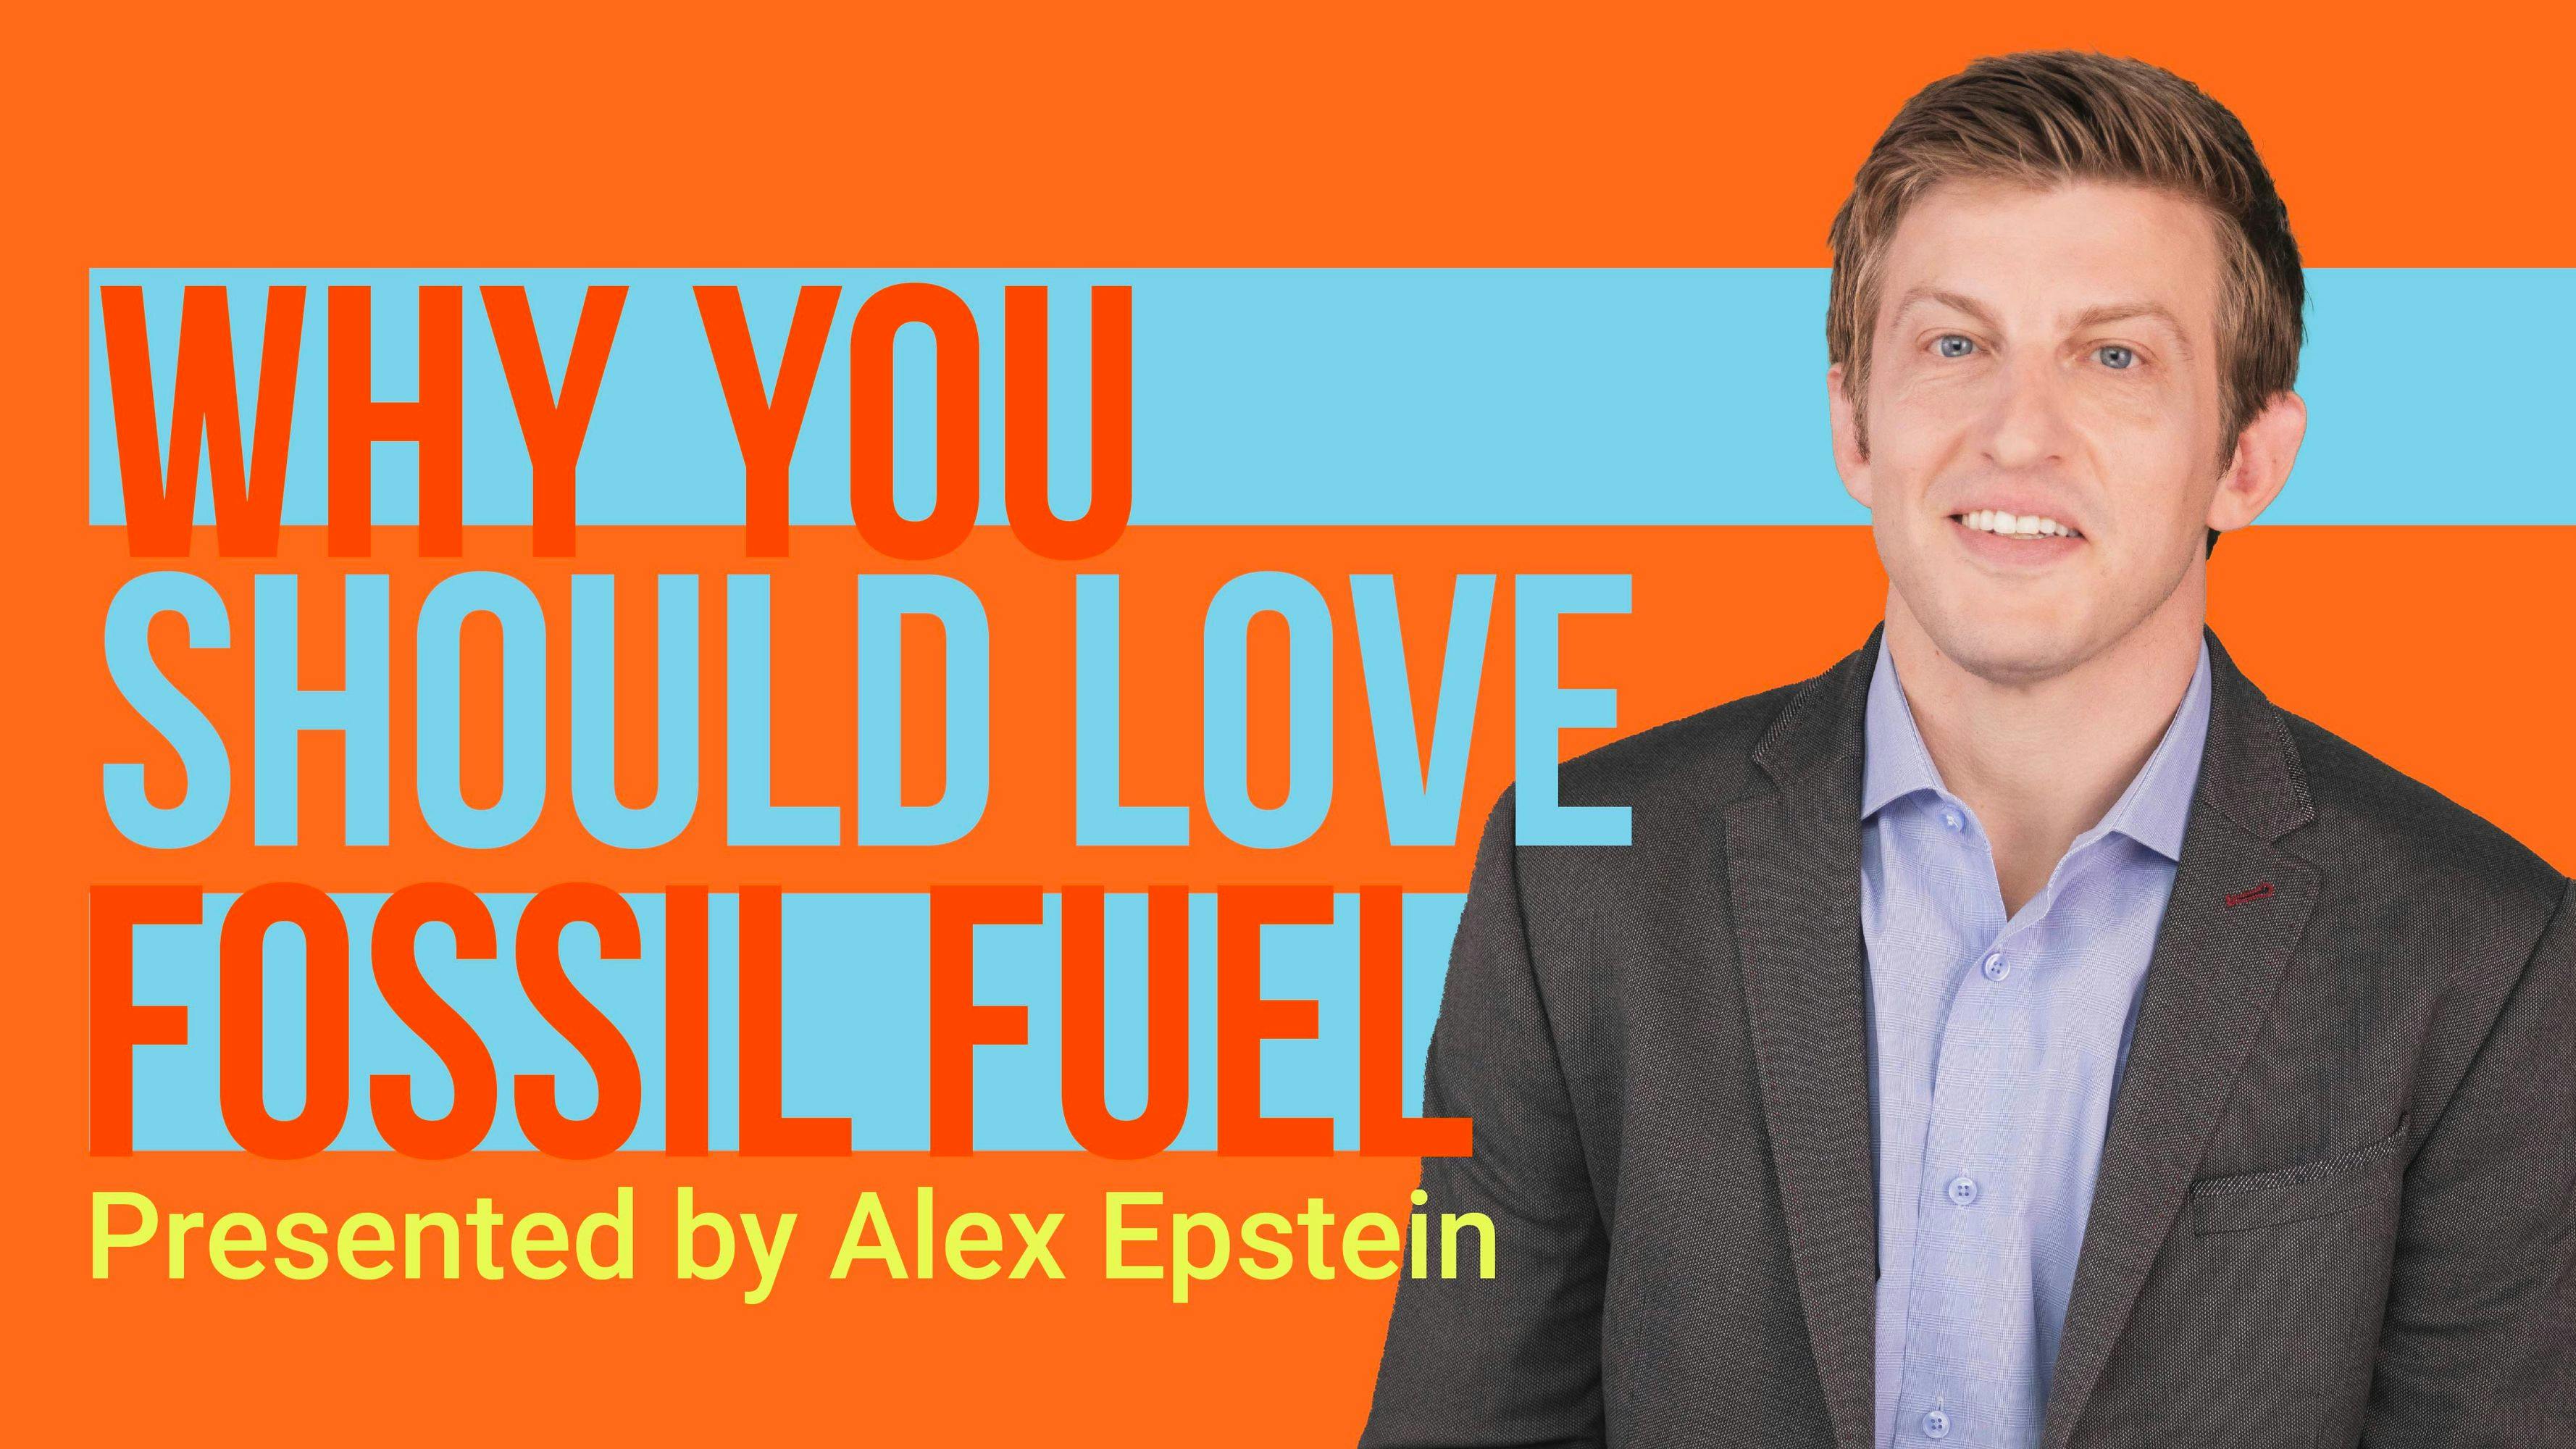 Why You Should Love Fossil Fuel